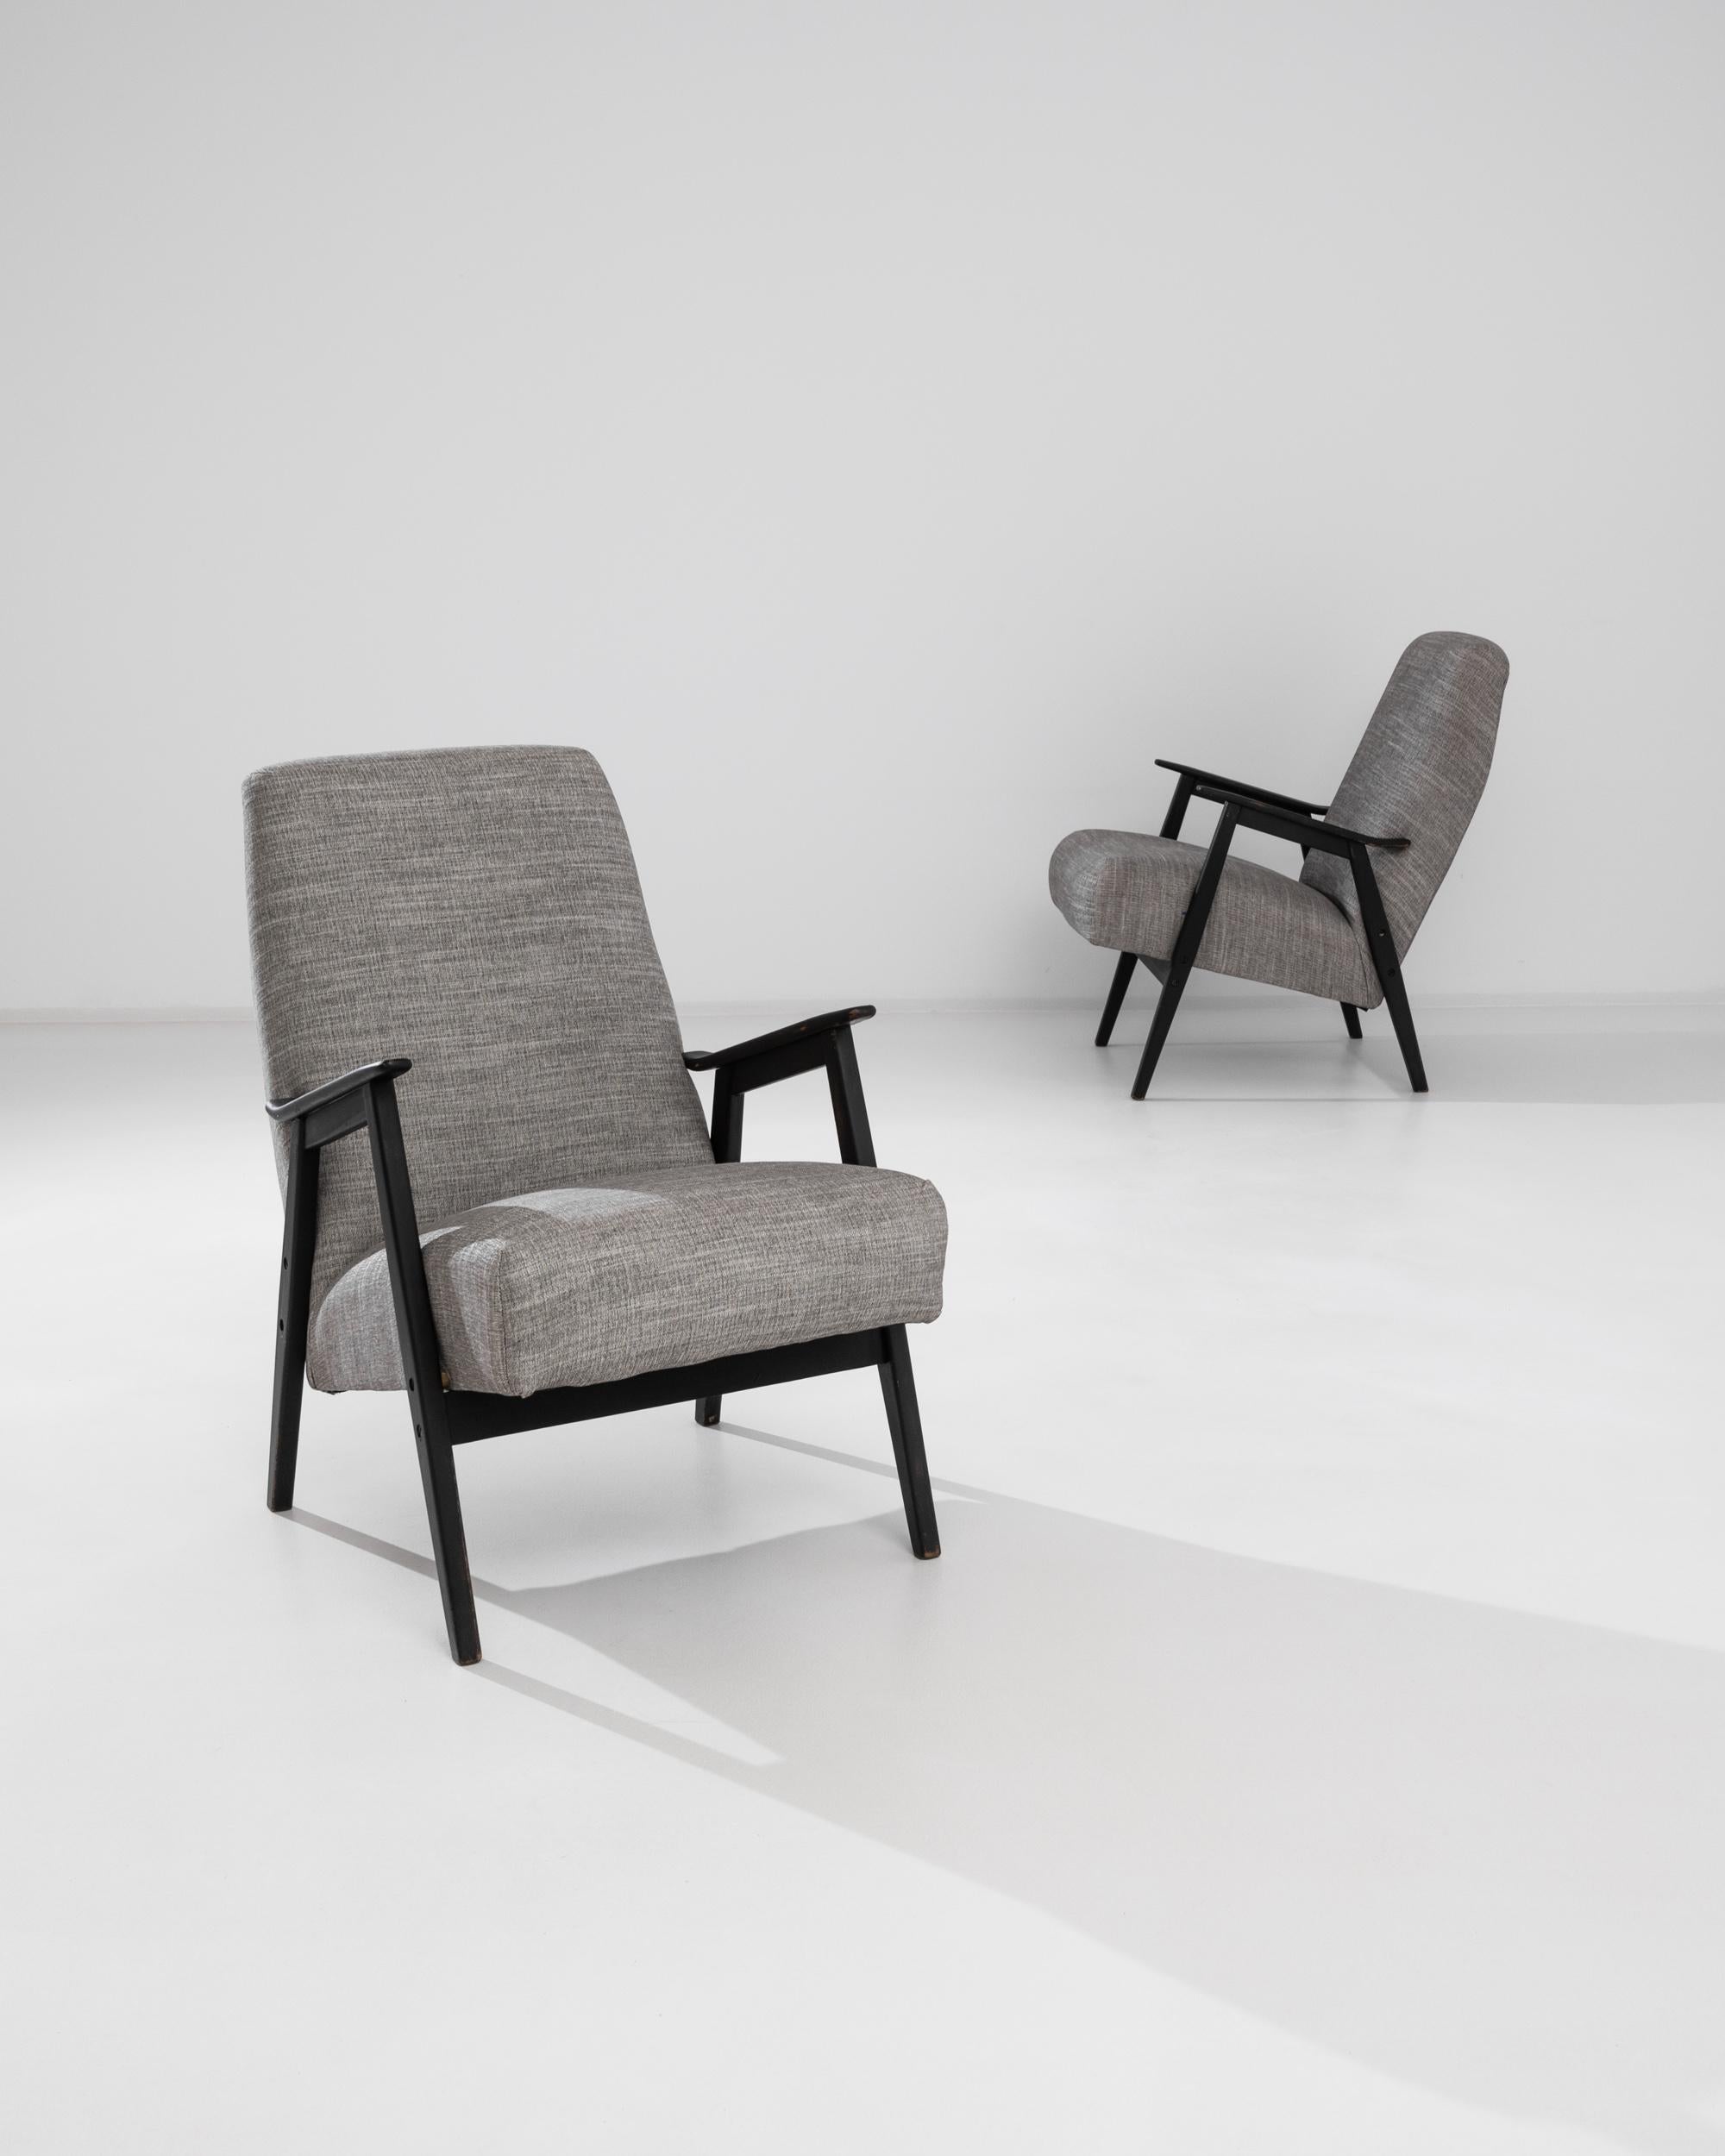 Graphic and stylish, this attractive pair of vintage wooden armchairs cut a striking silhouette. Made in the former Czechoslovakia in the 1960s, the upholstered seat hangs at a comfortable recline between a pair of angular wooden legs. The subtle